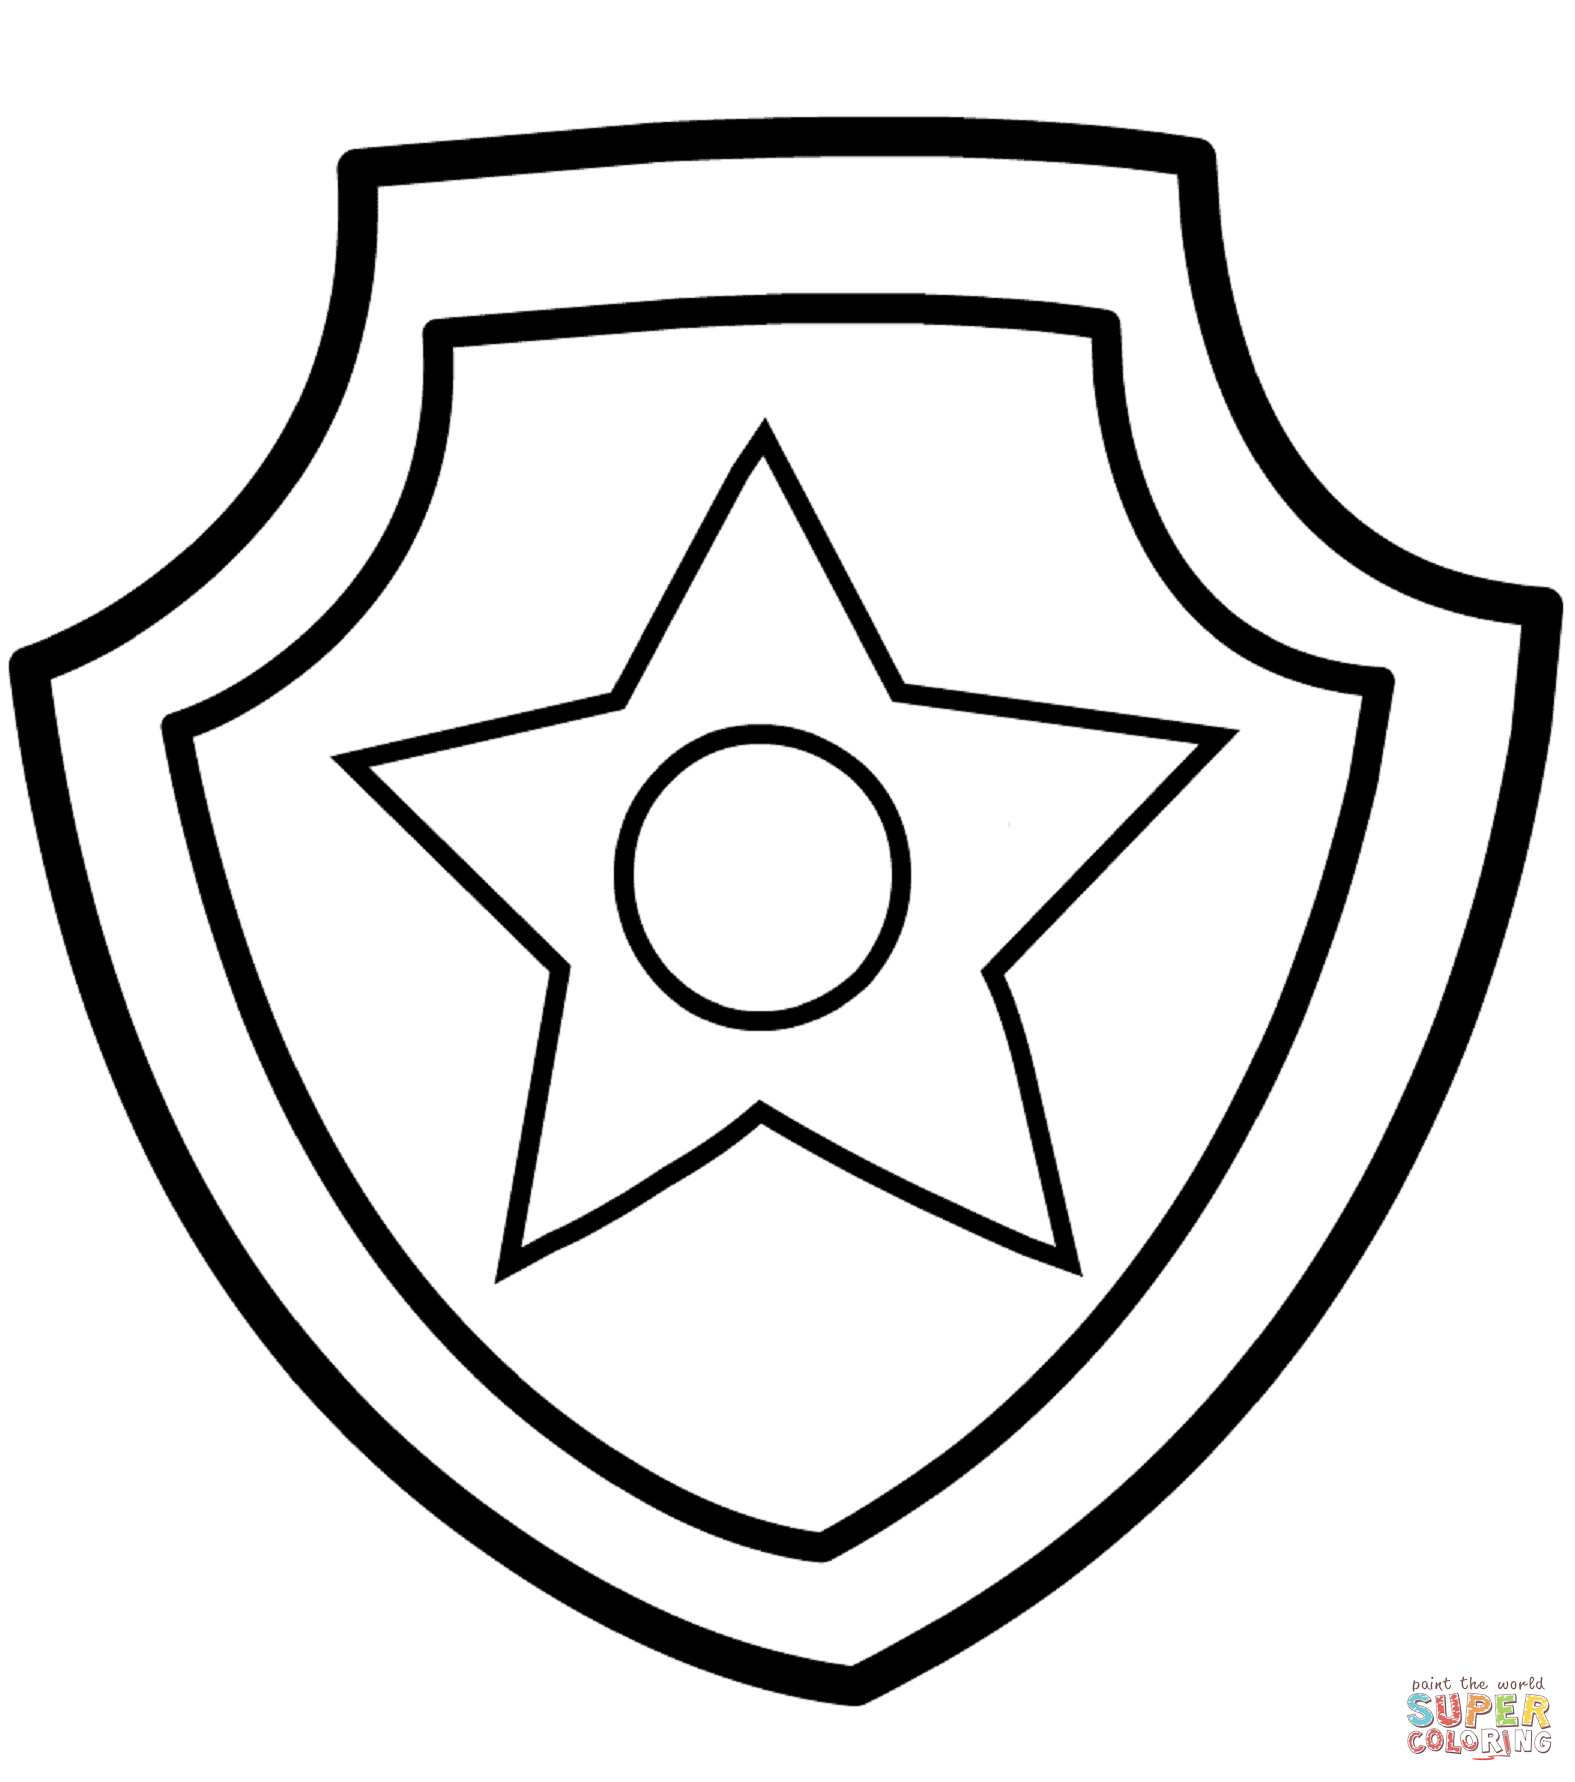 Paw patrol chase badge coloring page free printable coloring pages